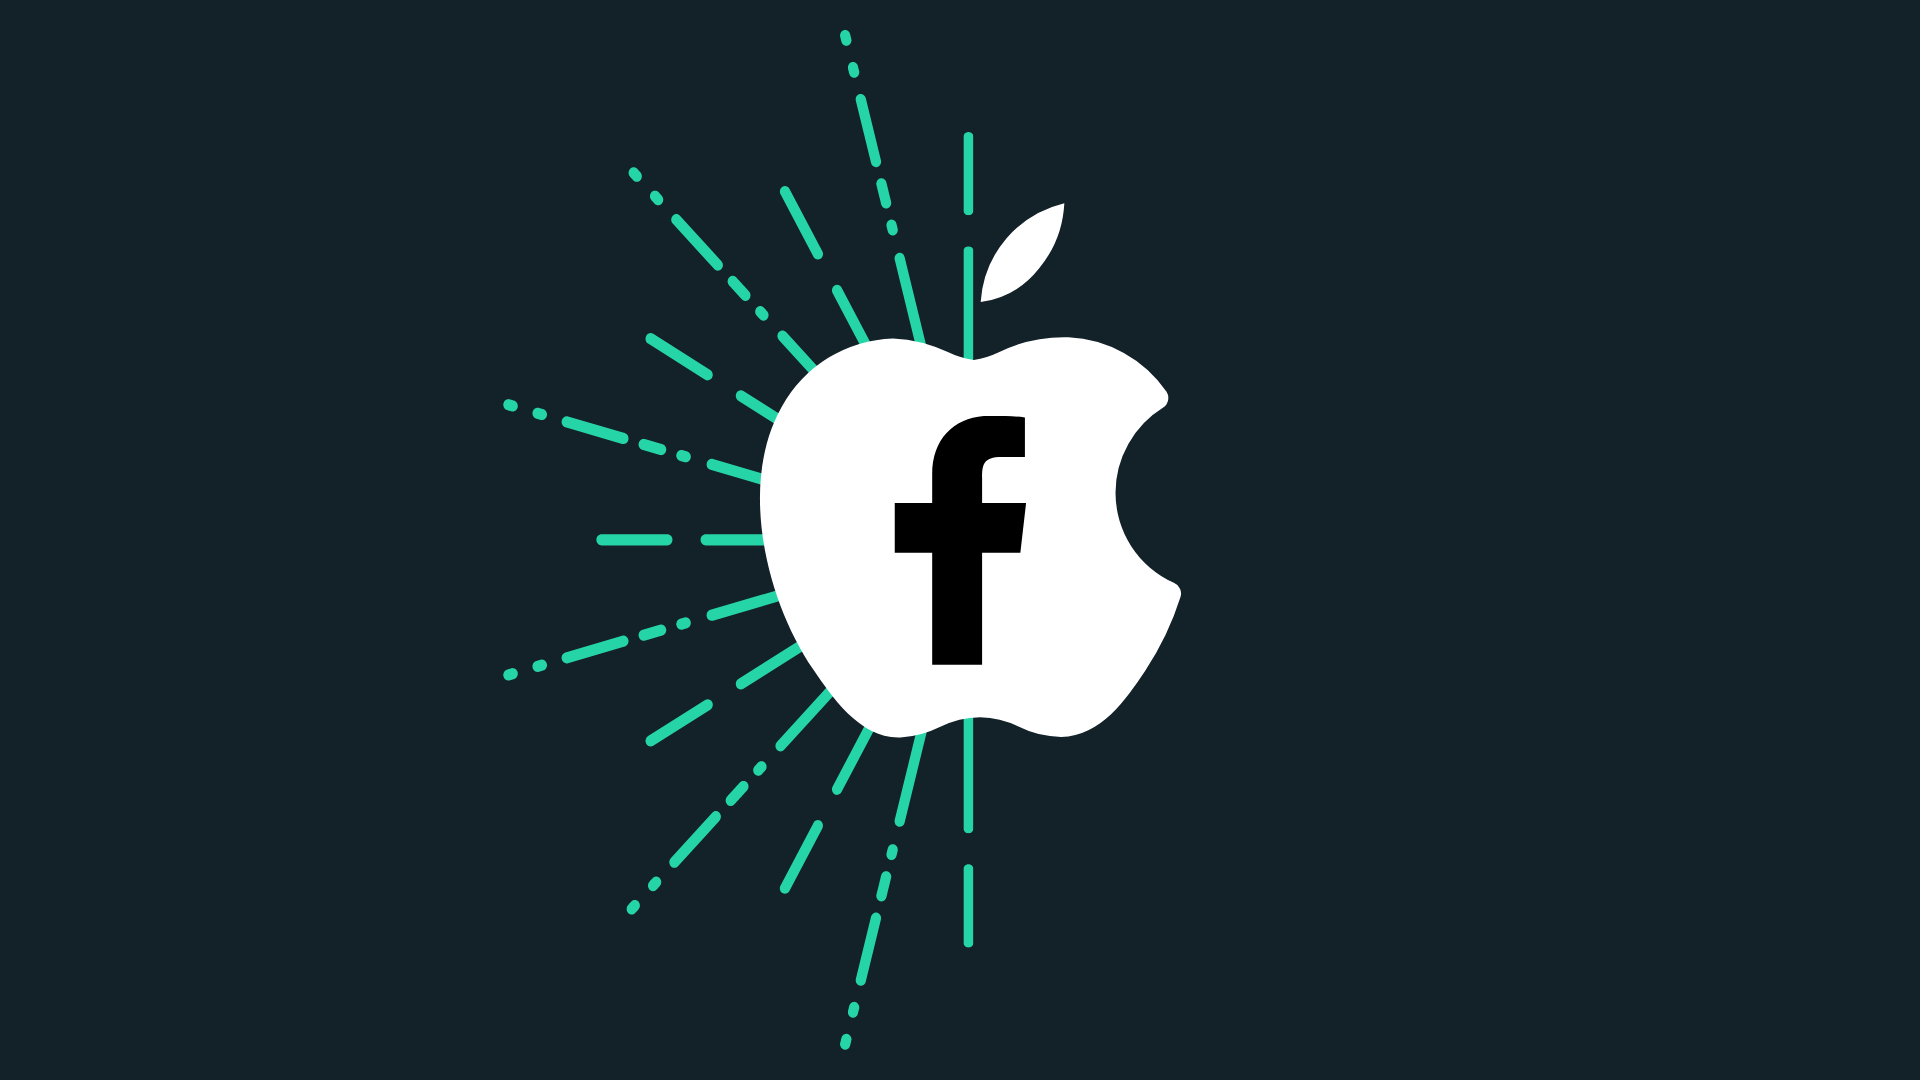 DigitalMaas Talks about the iOS 14.5 Update and the future of Facebook Advertising